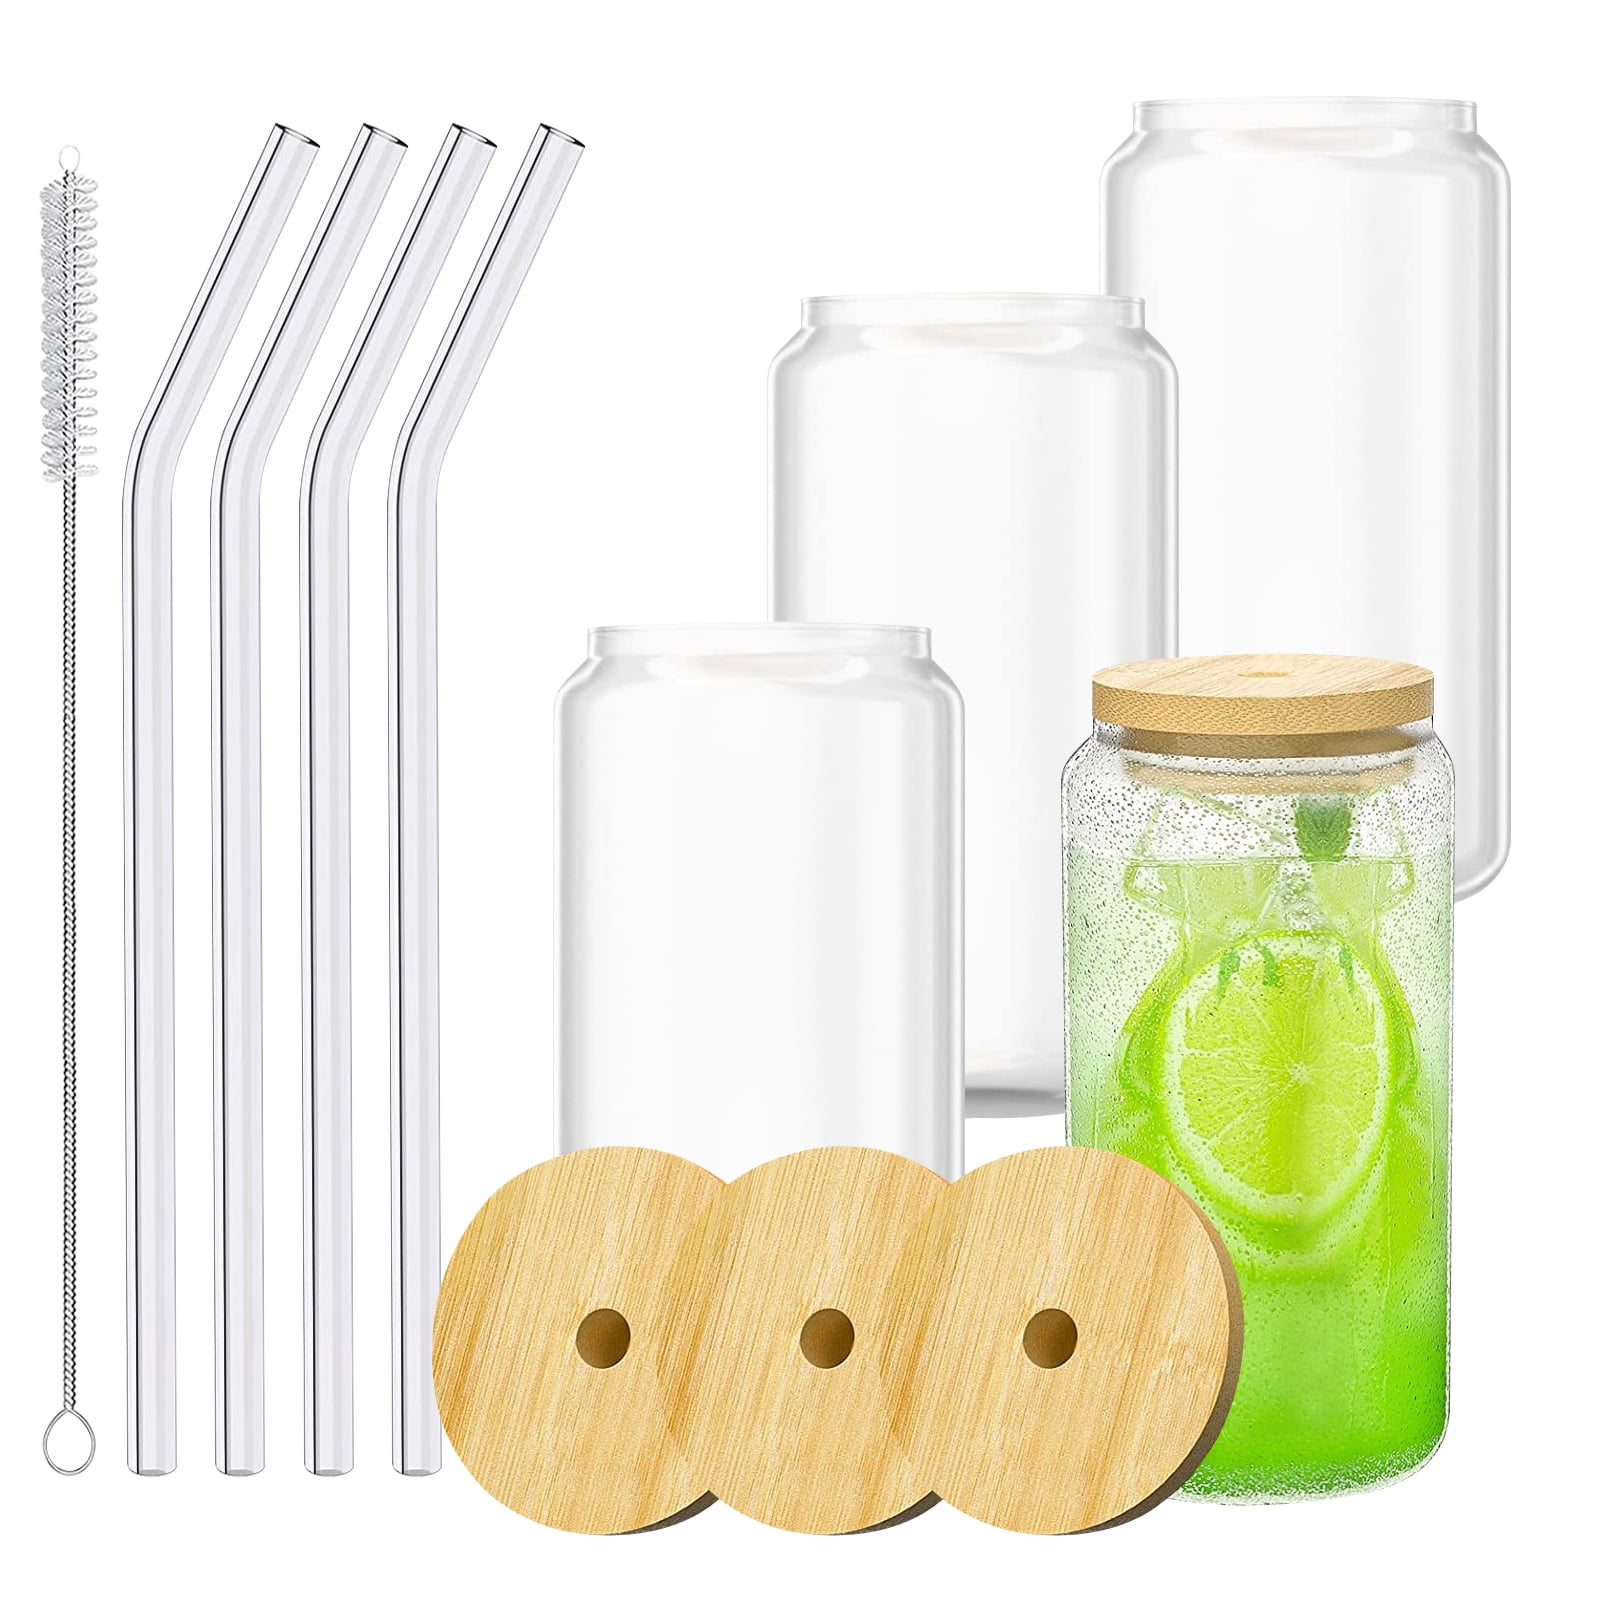 4 Sets Glass Coke Cup Jar Cups With Bamboo Lid And Straws Reusable